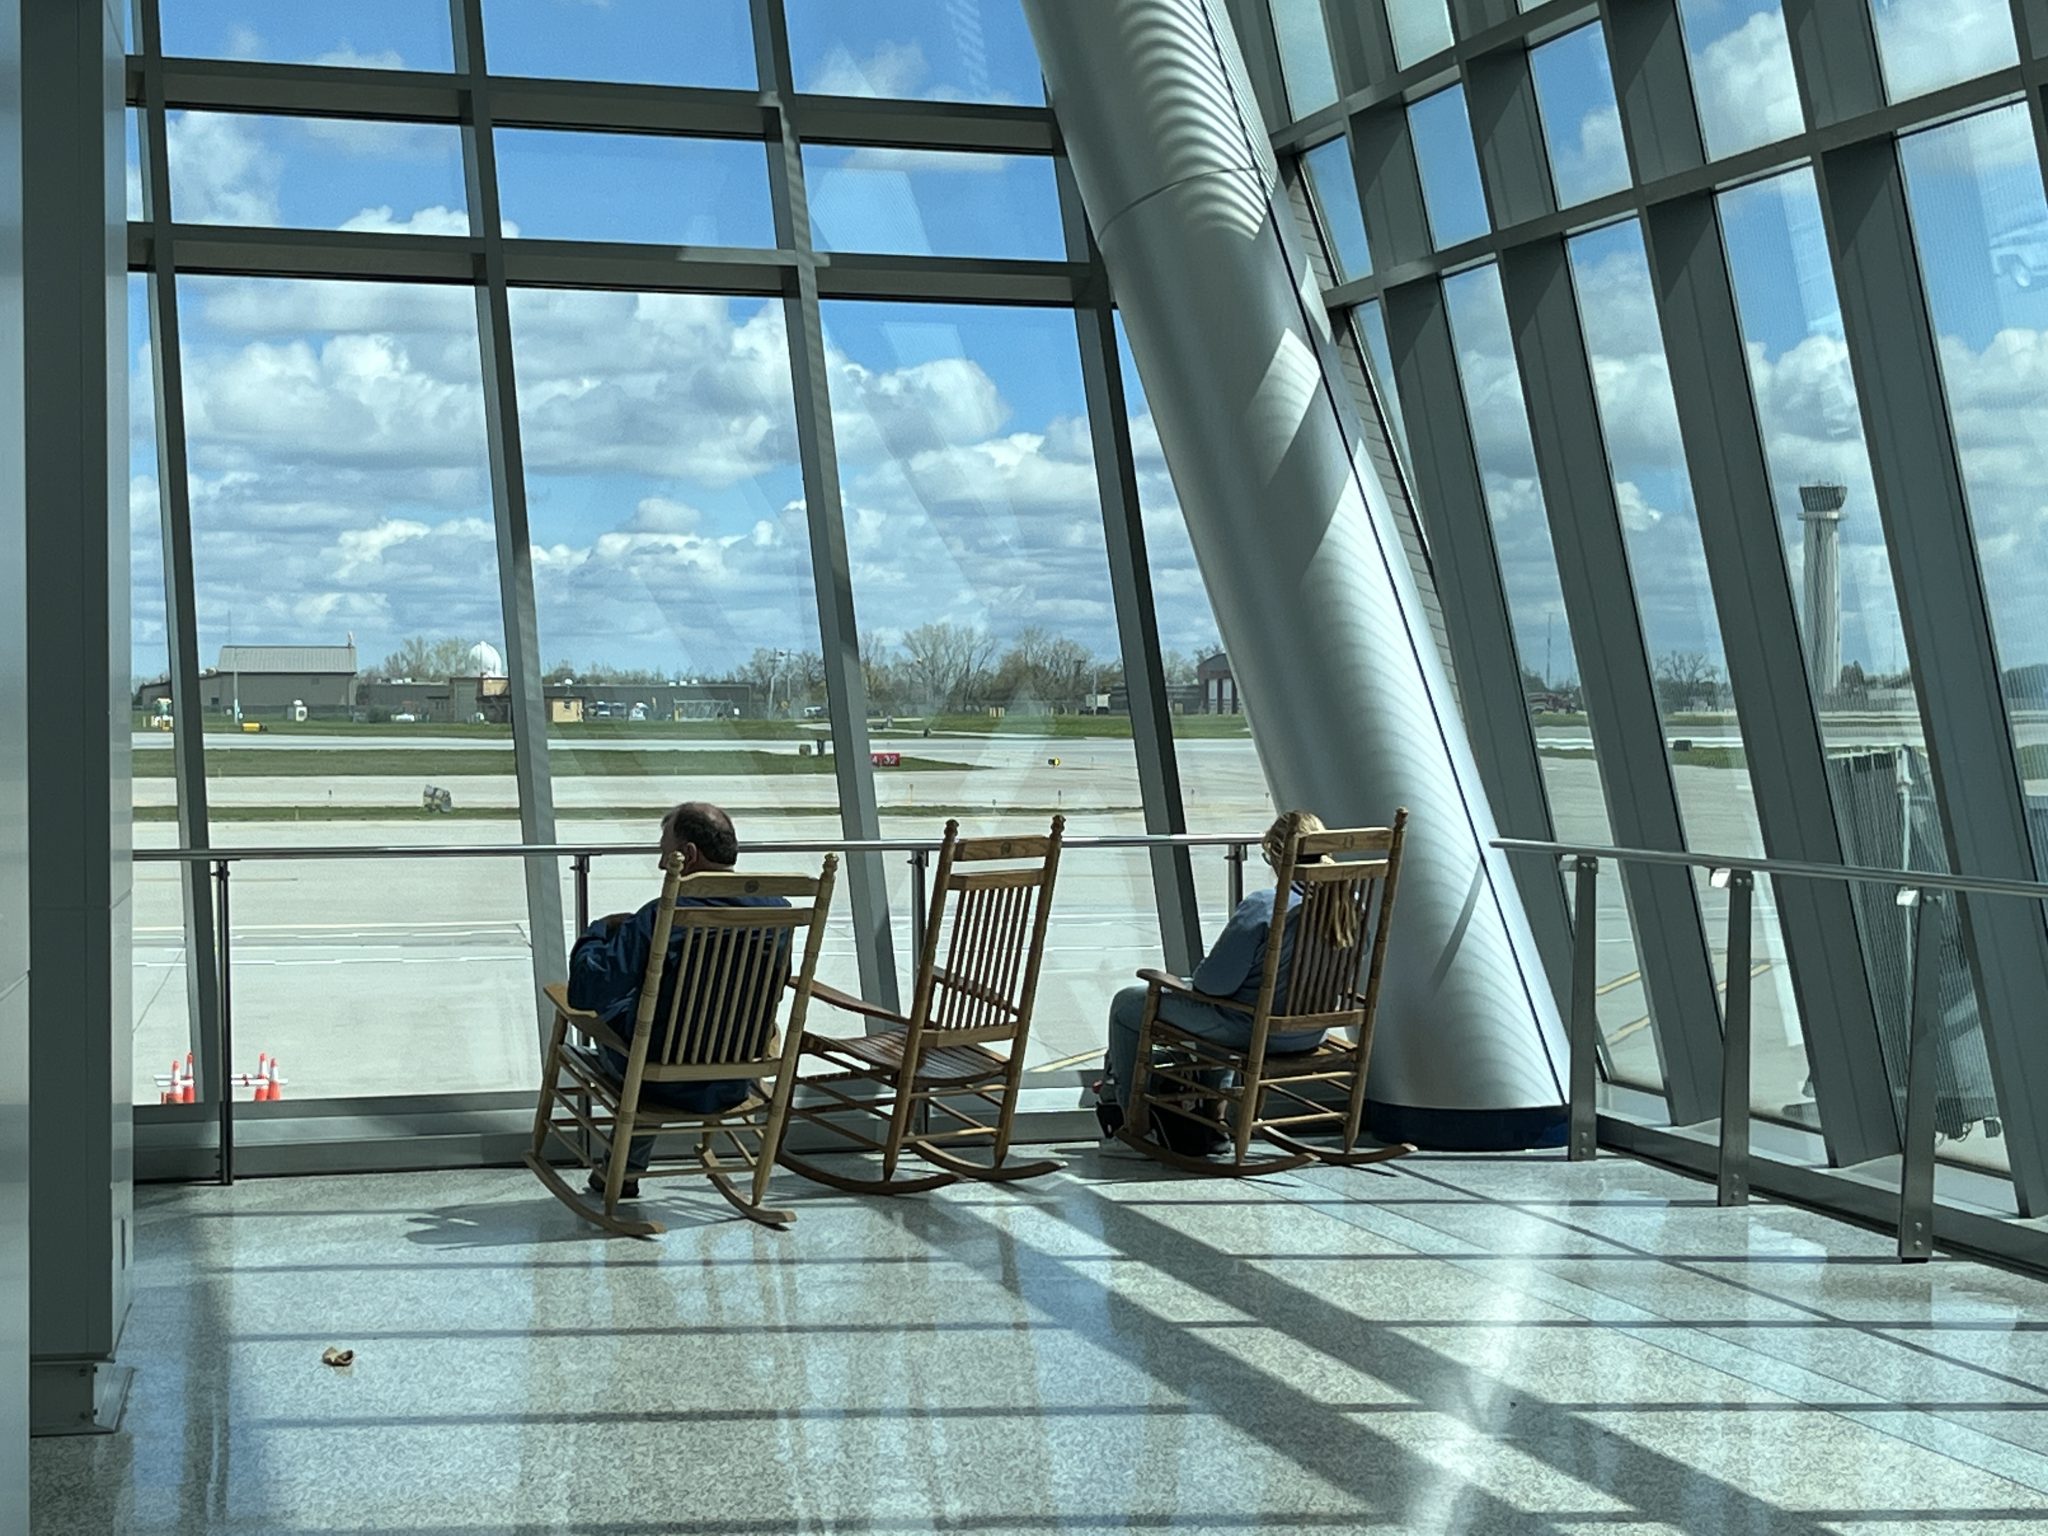 People sitting in rocking chairs in front of giant glass walls at an airport.